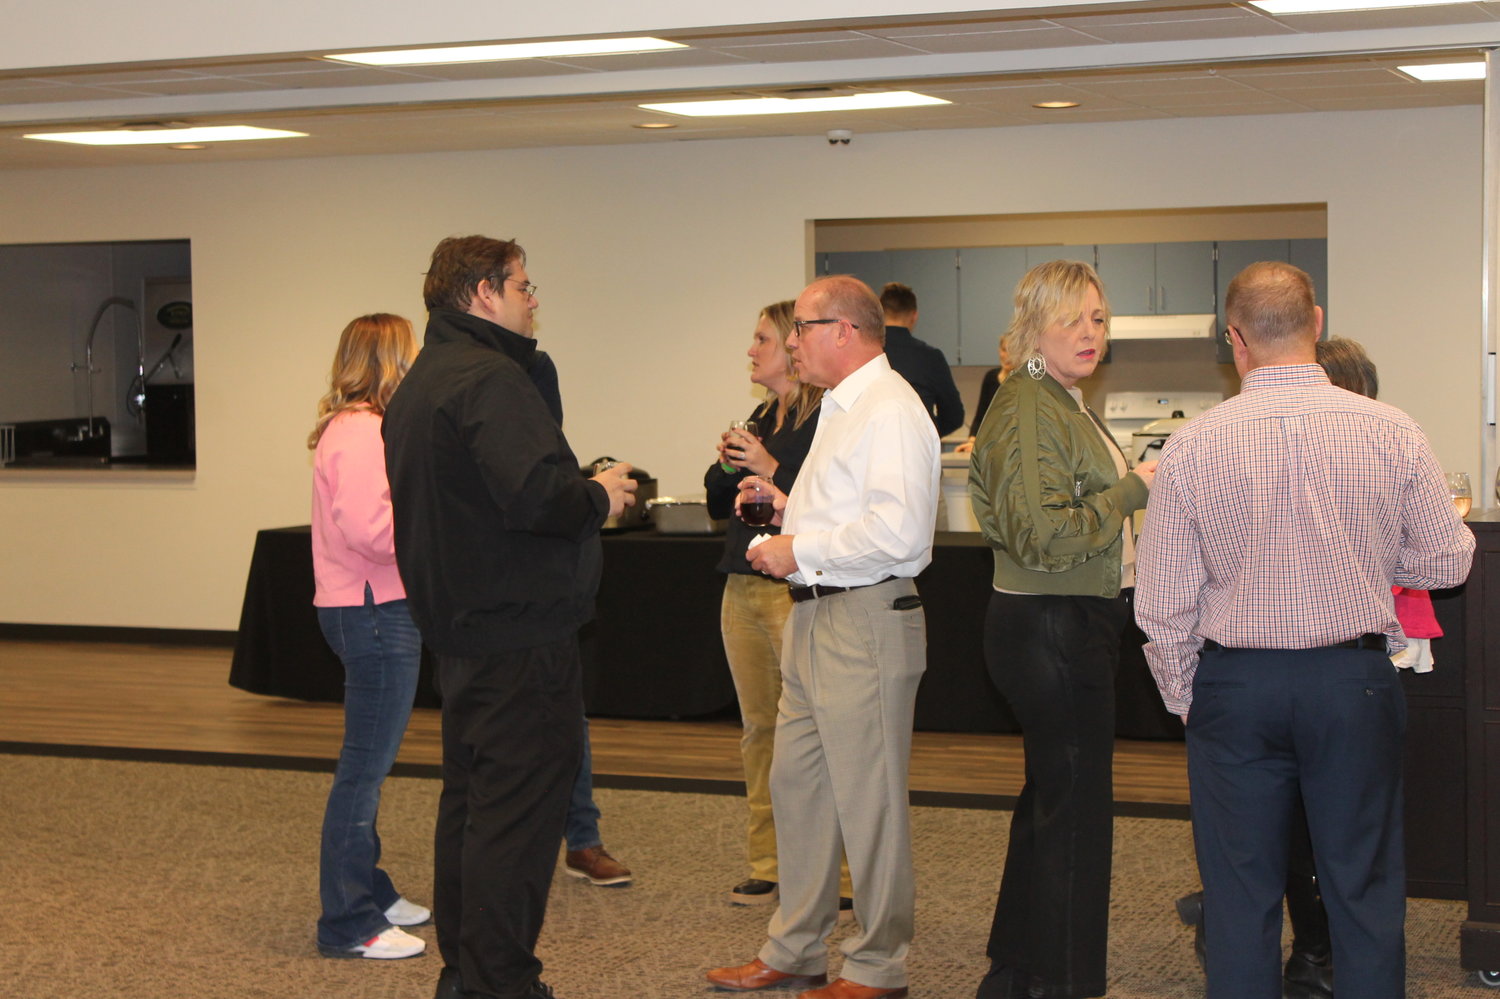 A social hour was held before the program at the West Liberty Chamber of Commerce Annual Dinner Tuesday, Jan. 10.